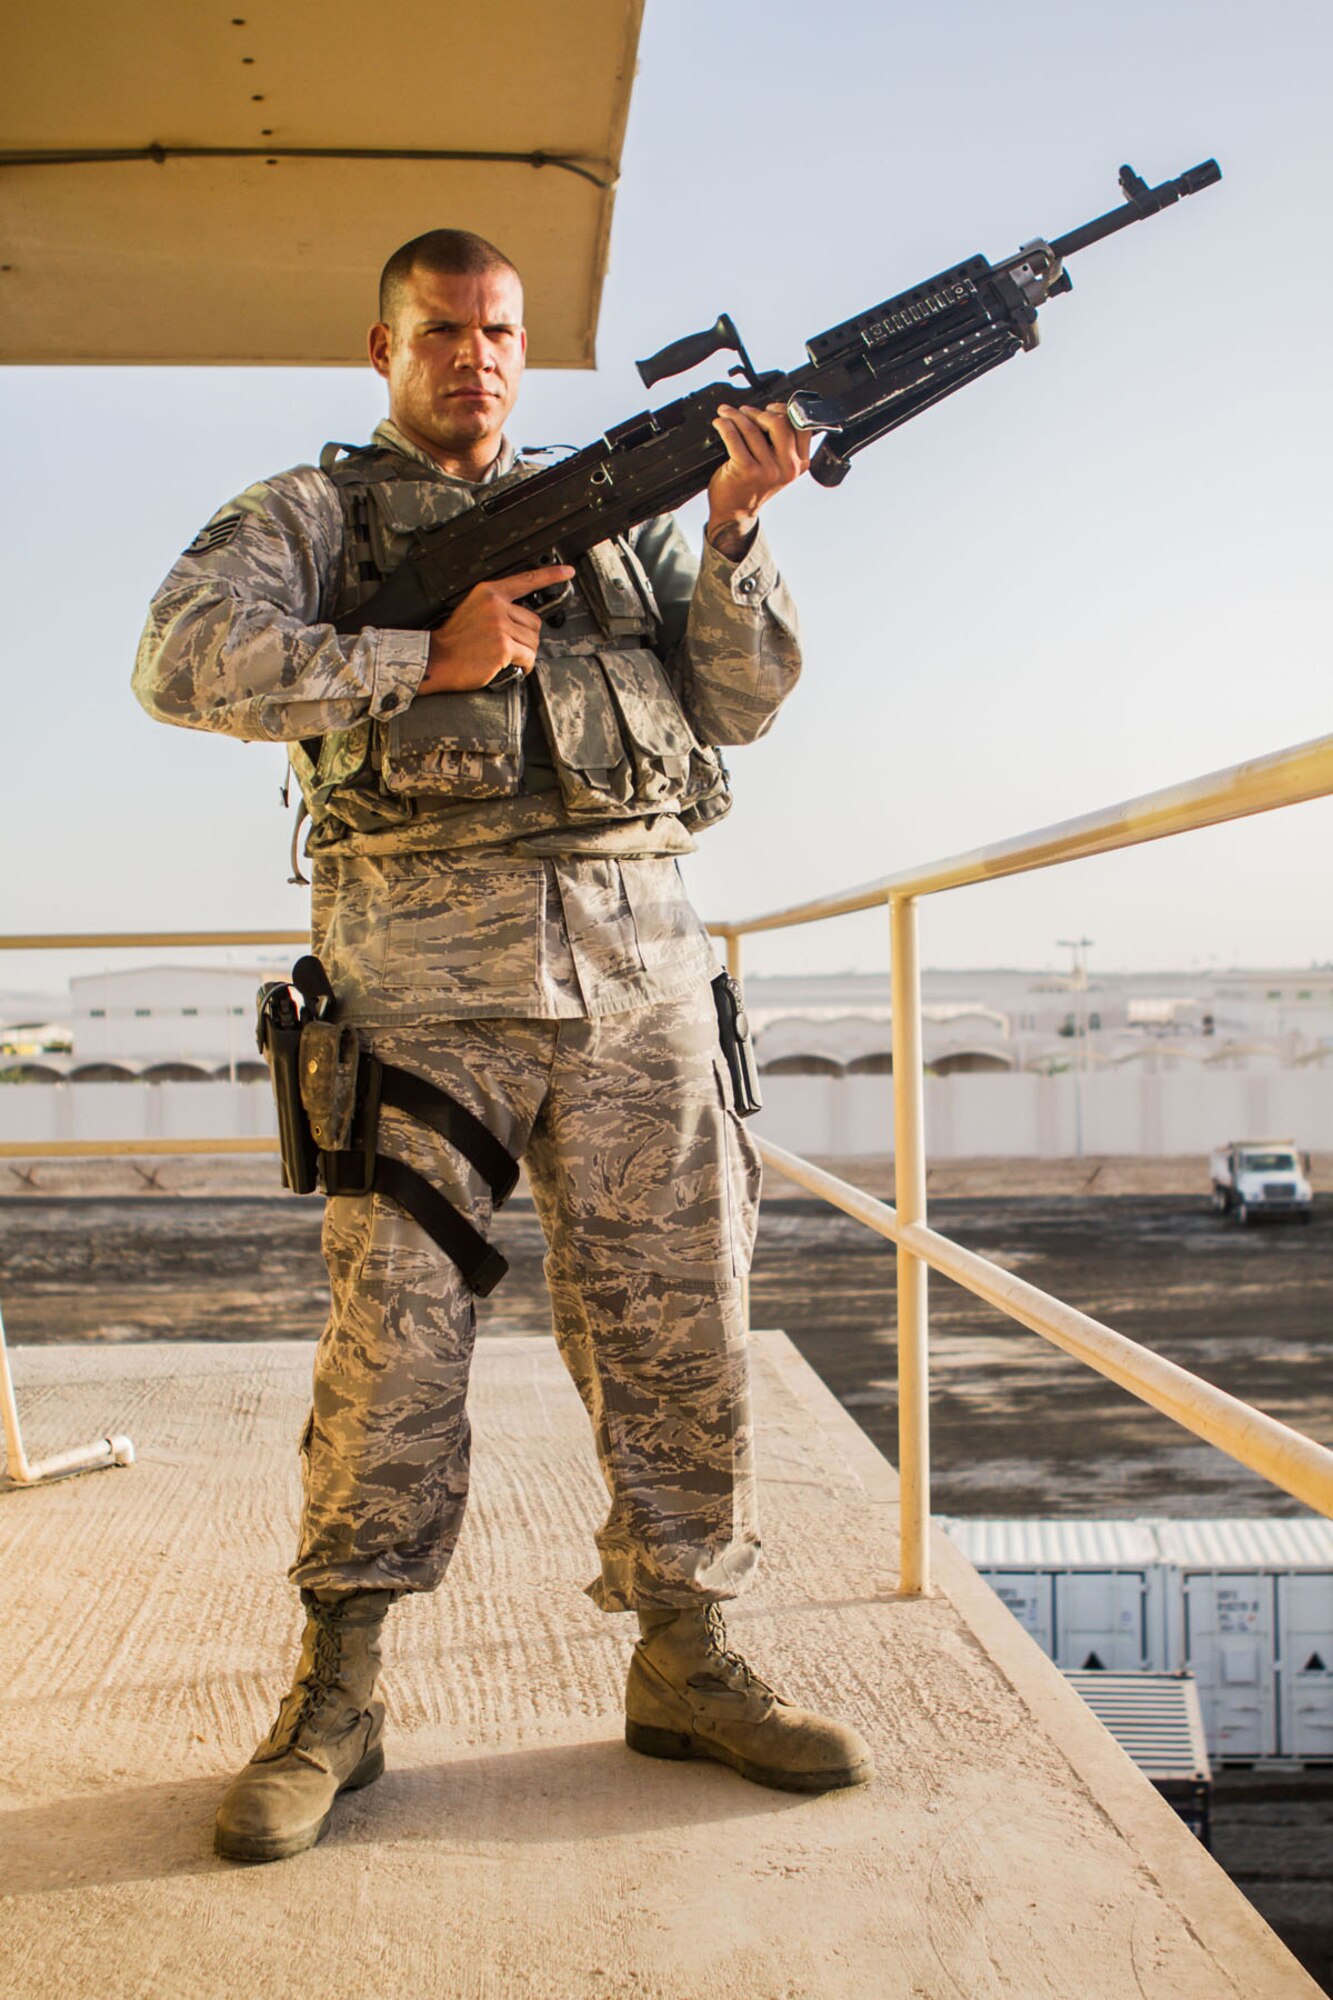 U.S. Air Force Staff Sgt. Joshua Odom, with the 169th Security Forces Squadron, South Carolina Air National Guard, is photographed while deployed to the 380th Air Expeditionary Wing in Southwest Asia, June 9, 2013.  (U.S. Air Force photo courtesy 380th ESFS/Released)